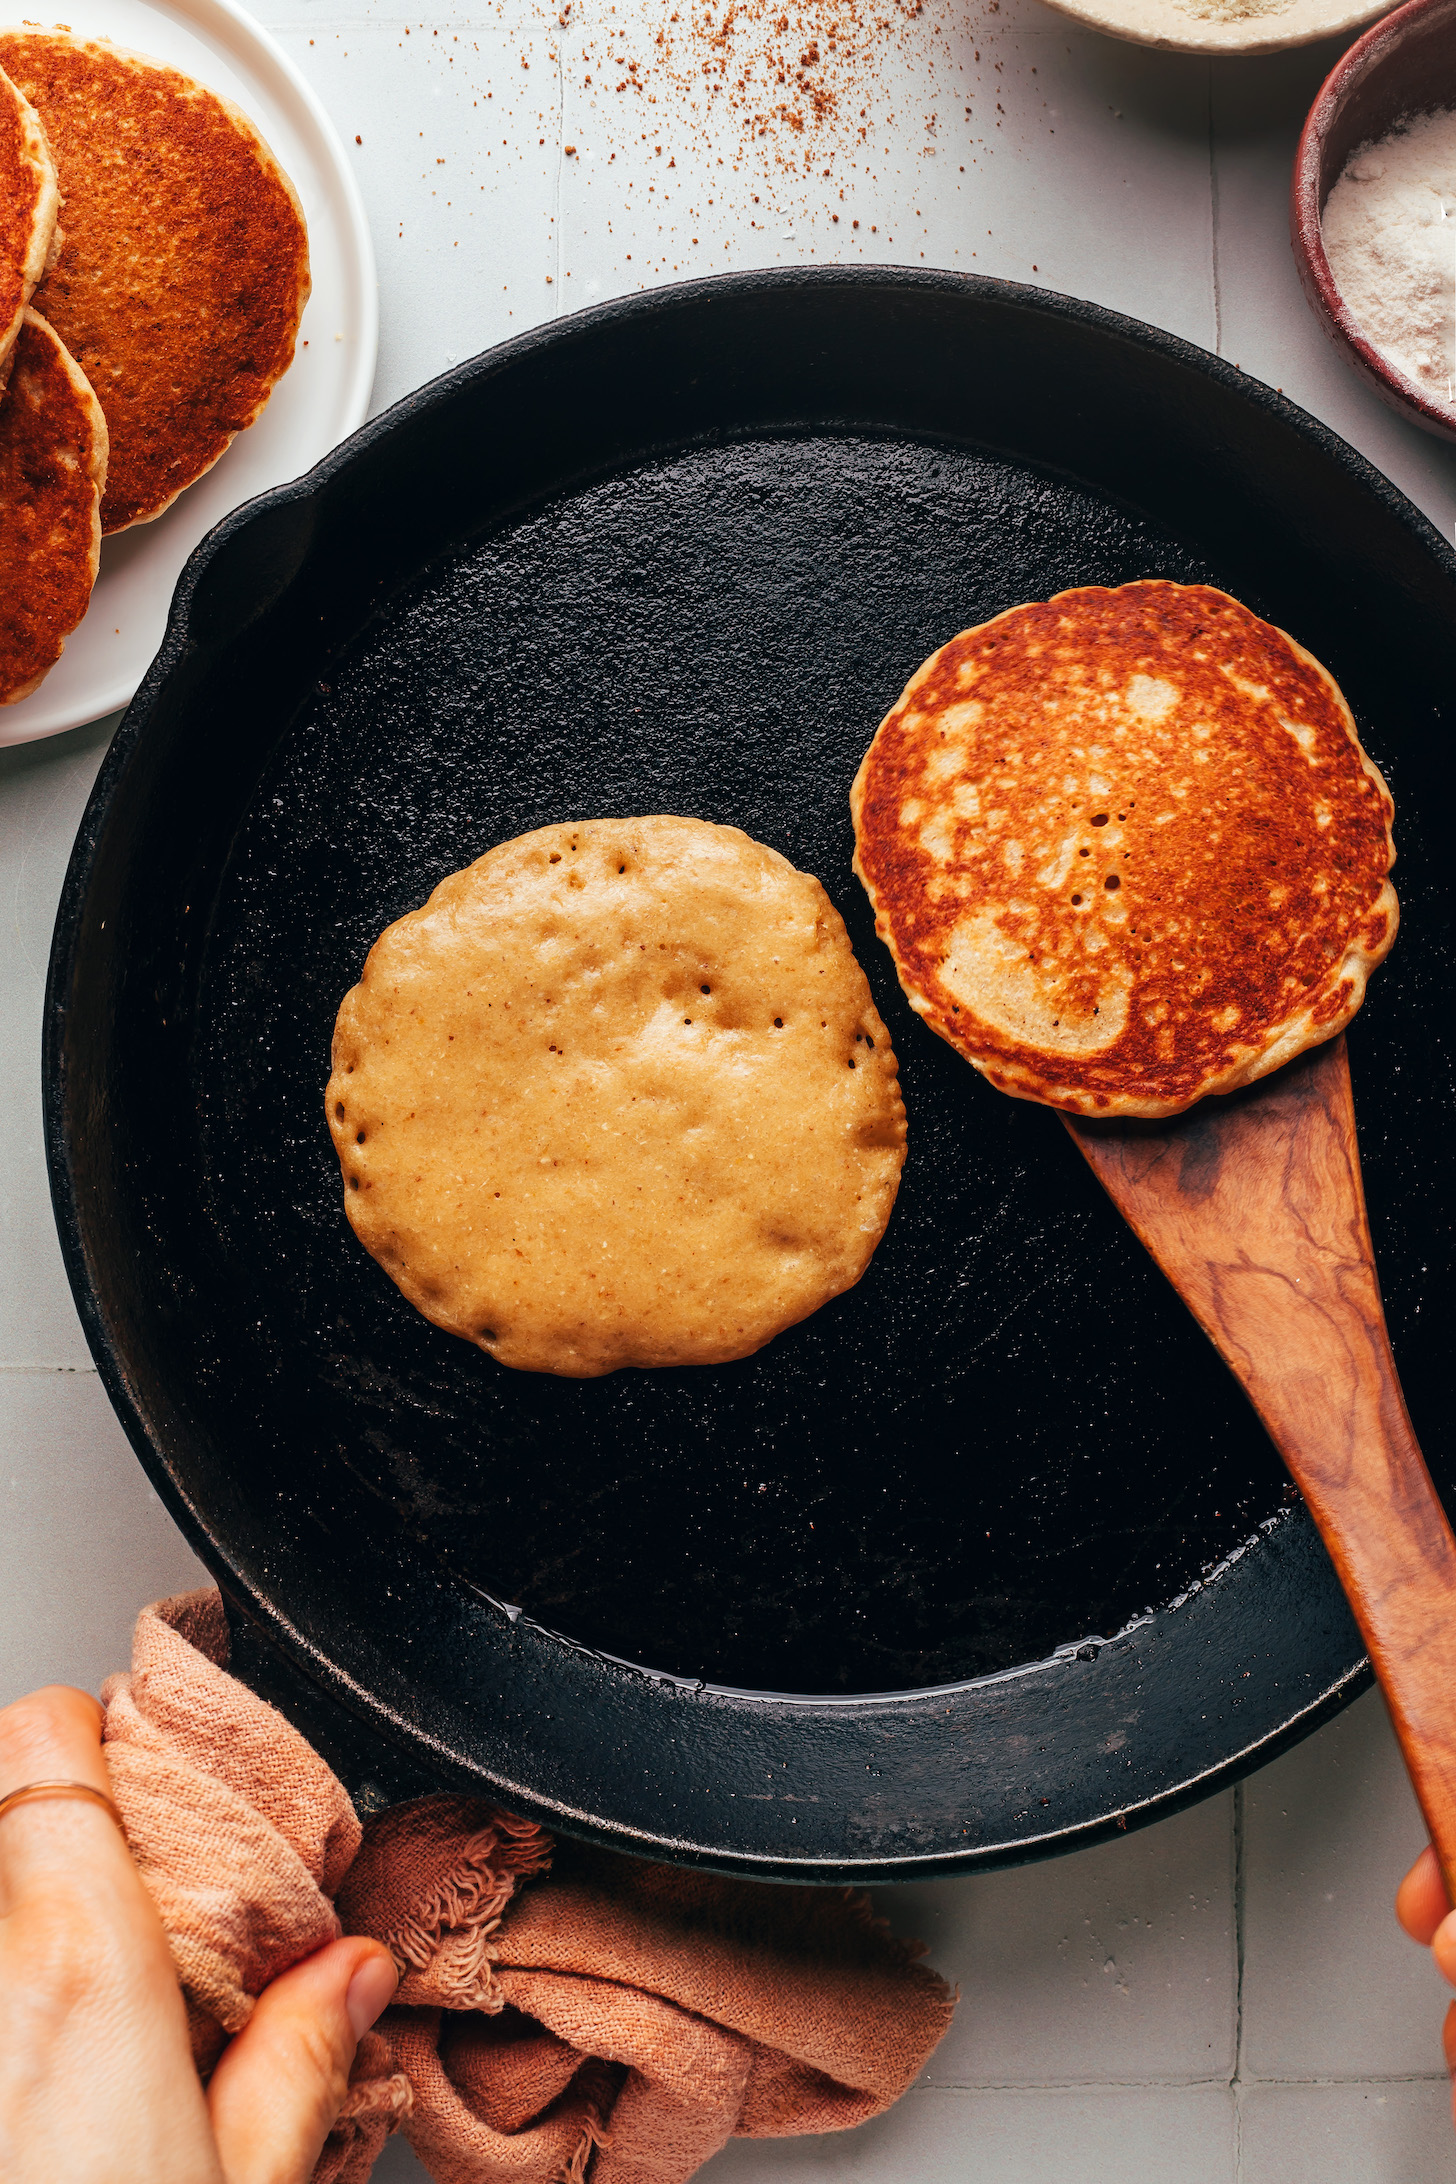 Cooking pancakes in a cast iron skillet